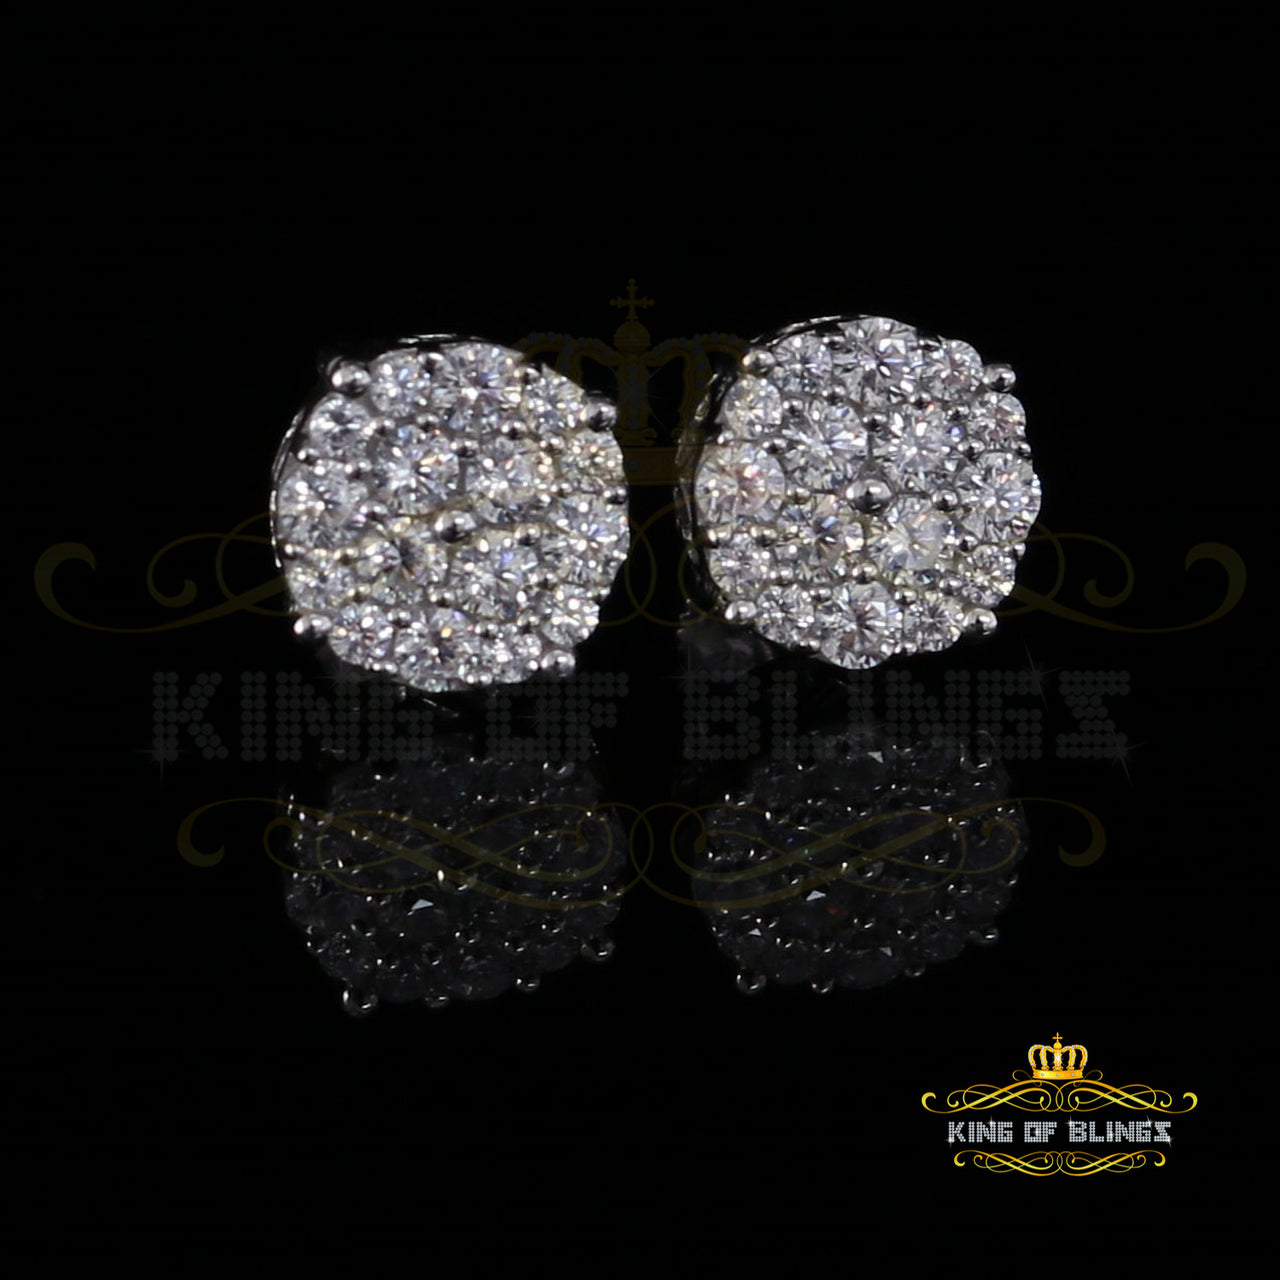 King of Blings- Aretes Para Hombre 925 White Silver 2.0ct Cubic Zirconia Round Women's Earrings KING OF BLINGS